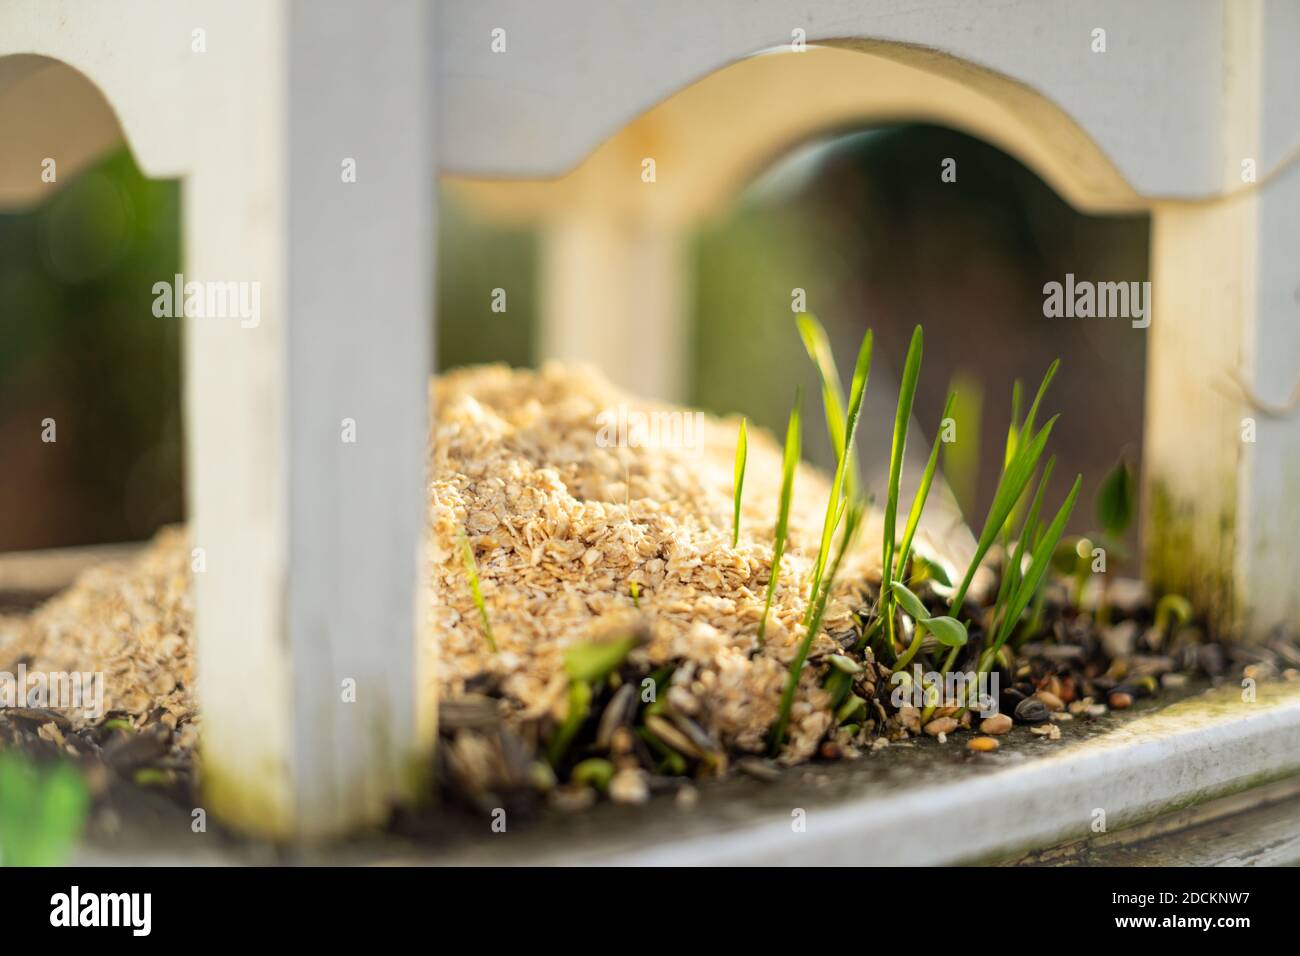 Sunflower and oat sprouts in a bird feeder Stock Photo